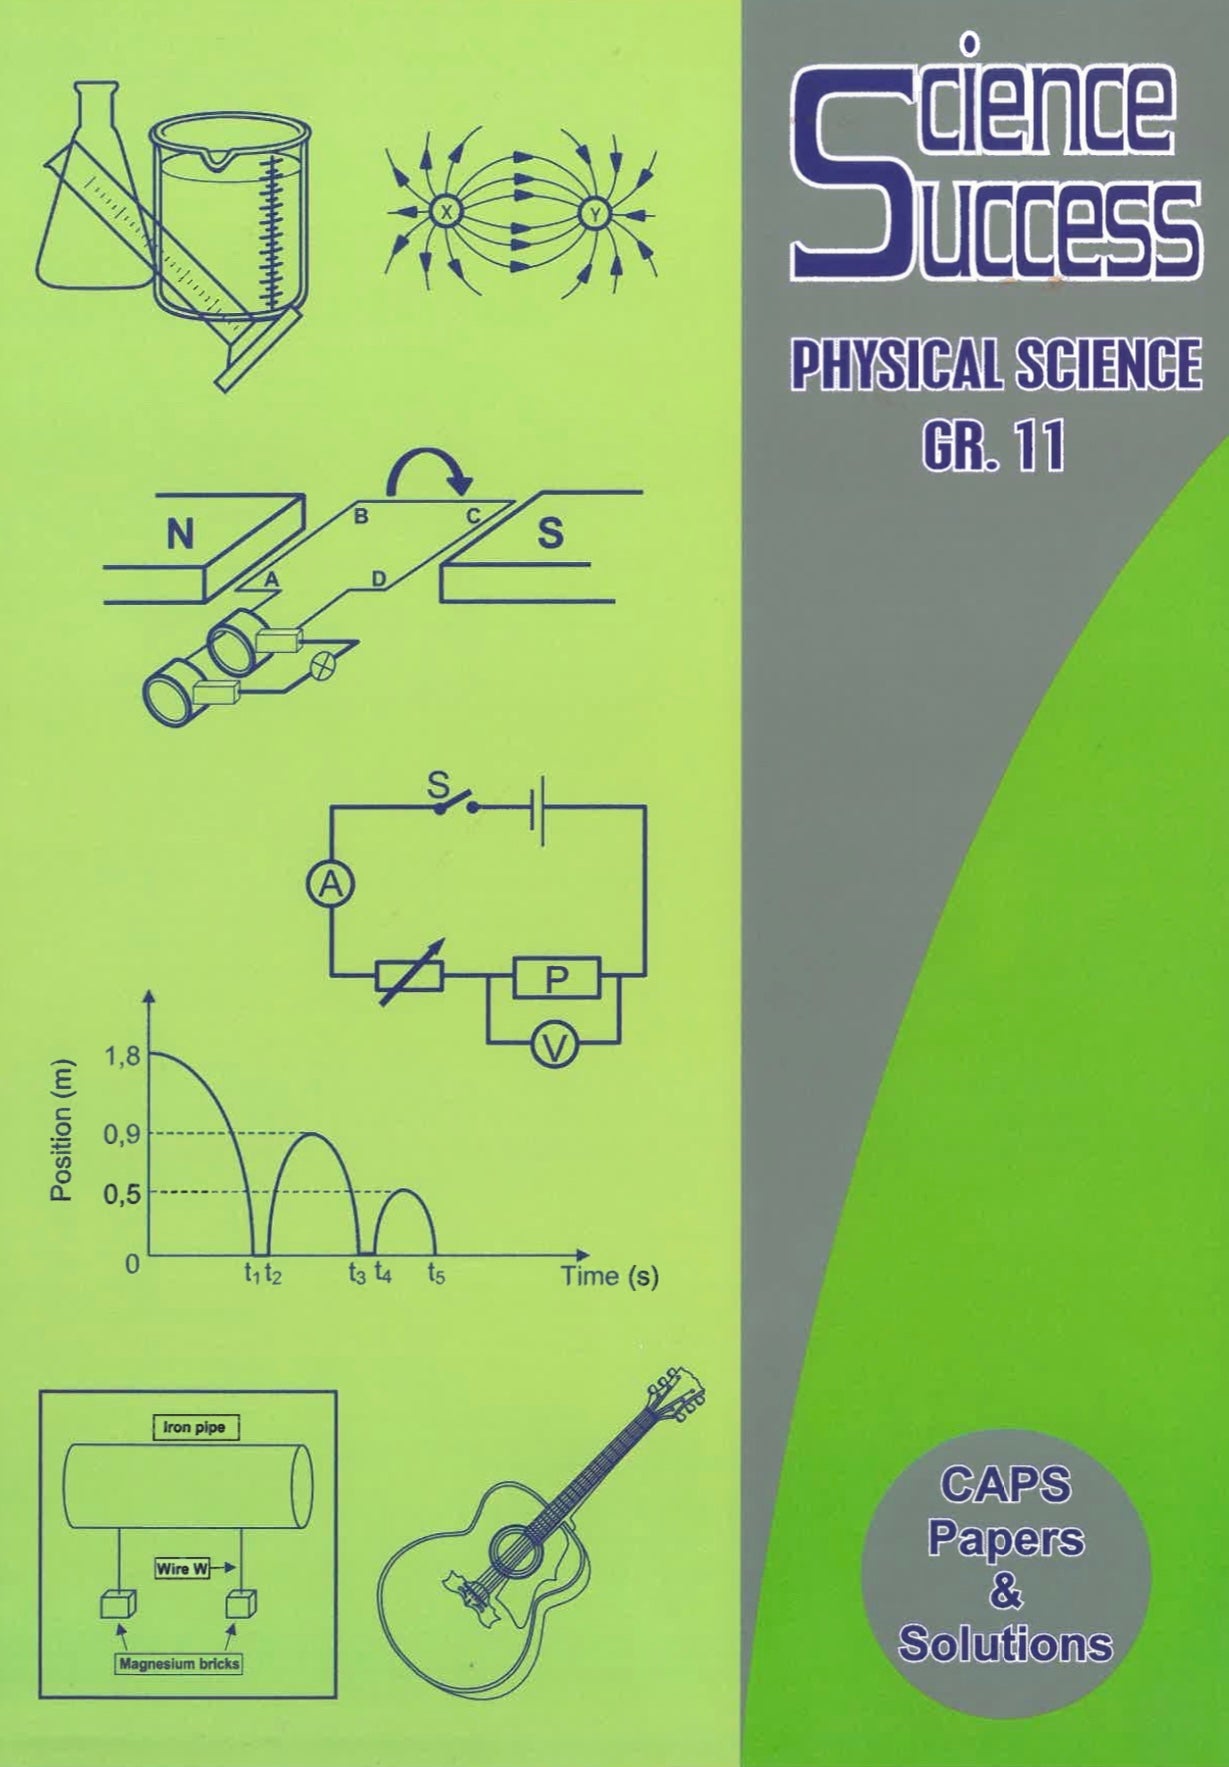 Science Success Physical Sciences Study Guide Gr 11